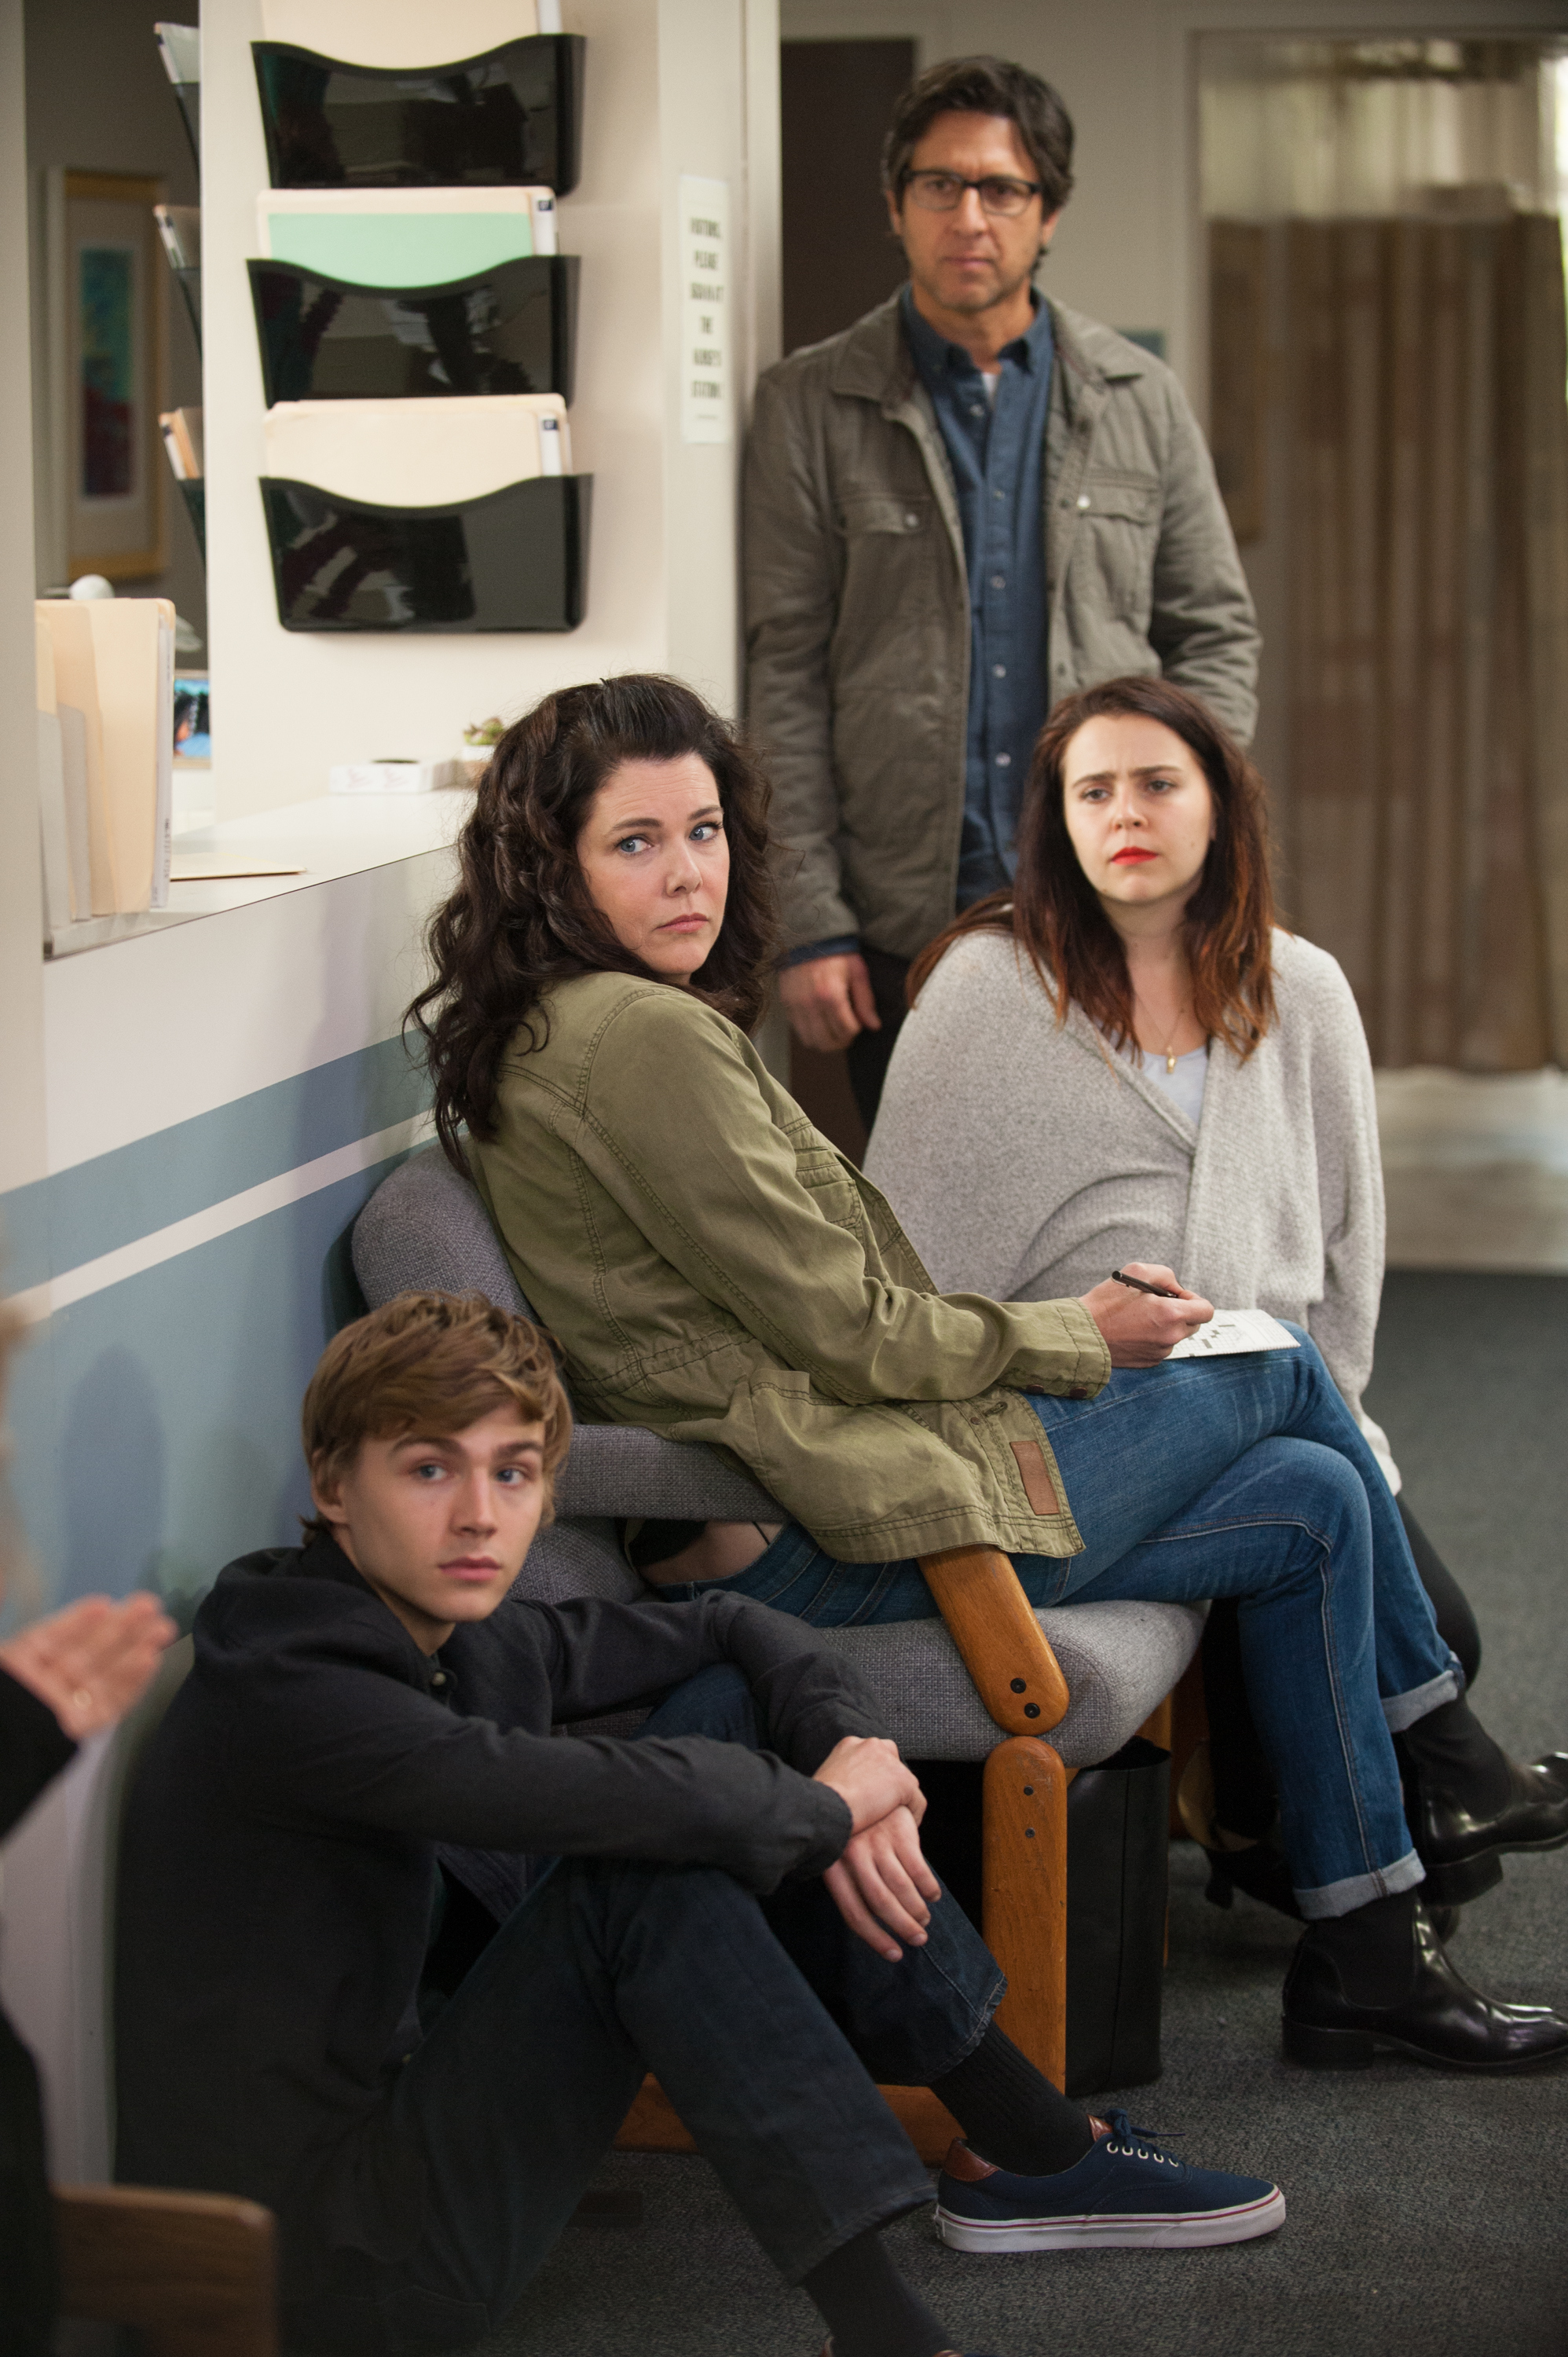 From left: Miles Heizer as Drew Holt, Lauren Graham as Sarah Braverman, Mae Whitman as Amber Holt and Ray Romano as Hank Rizzoli in the "How Did We Get Here?" episode of 'Parenthood'.